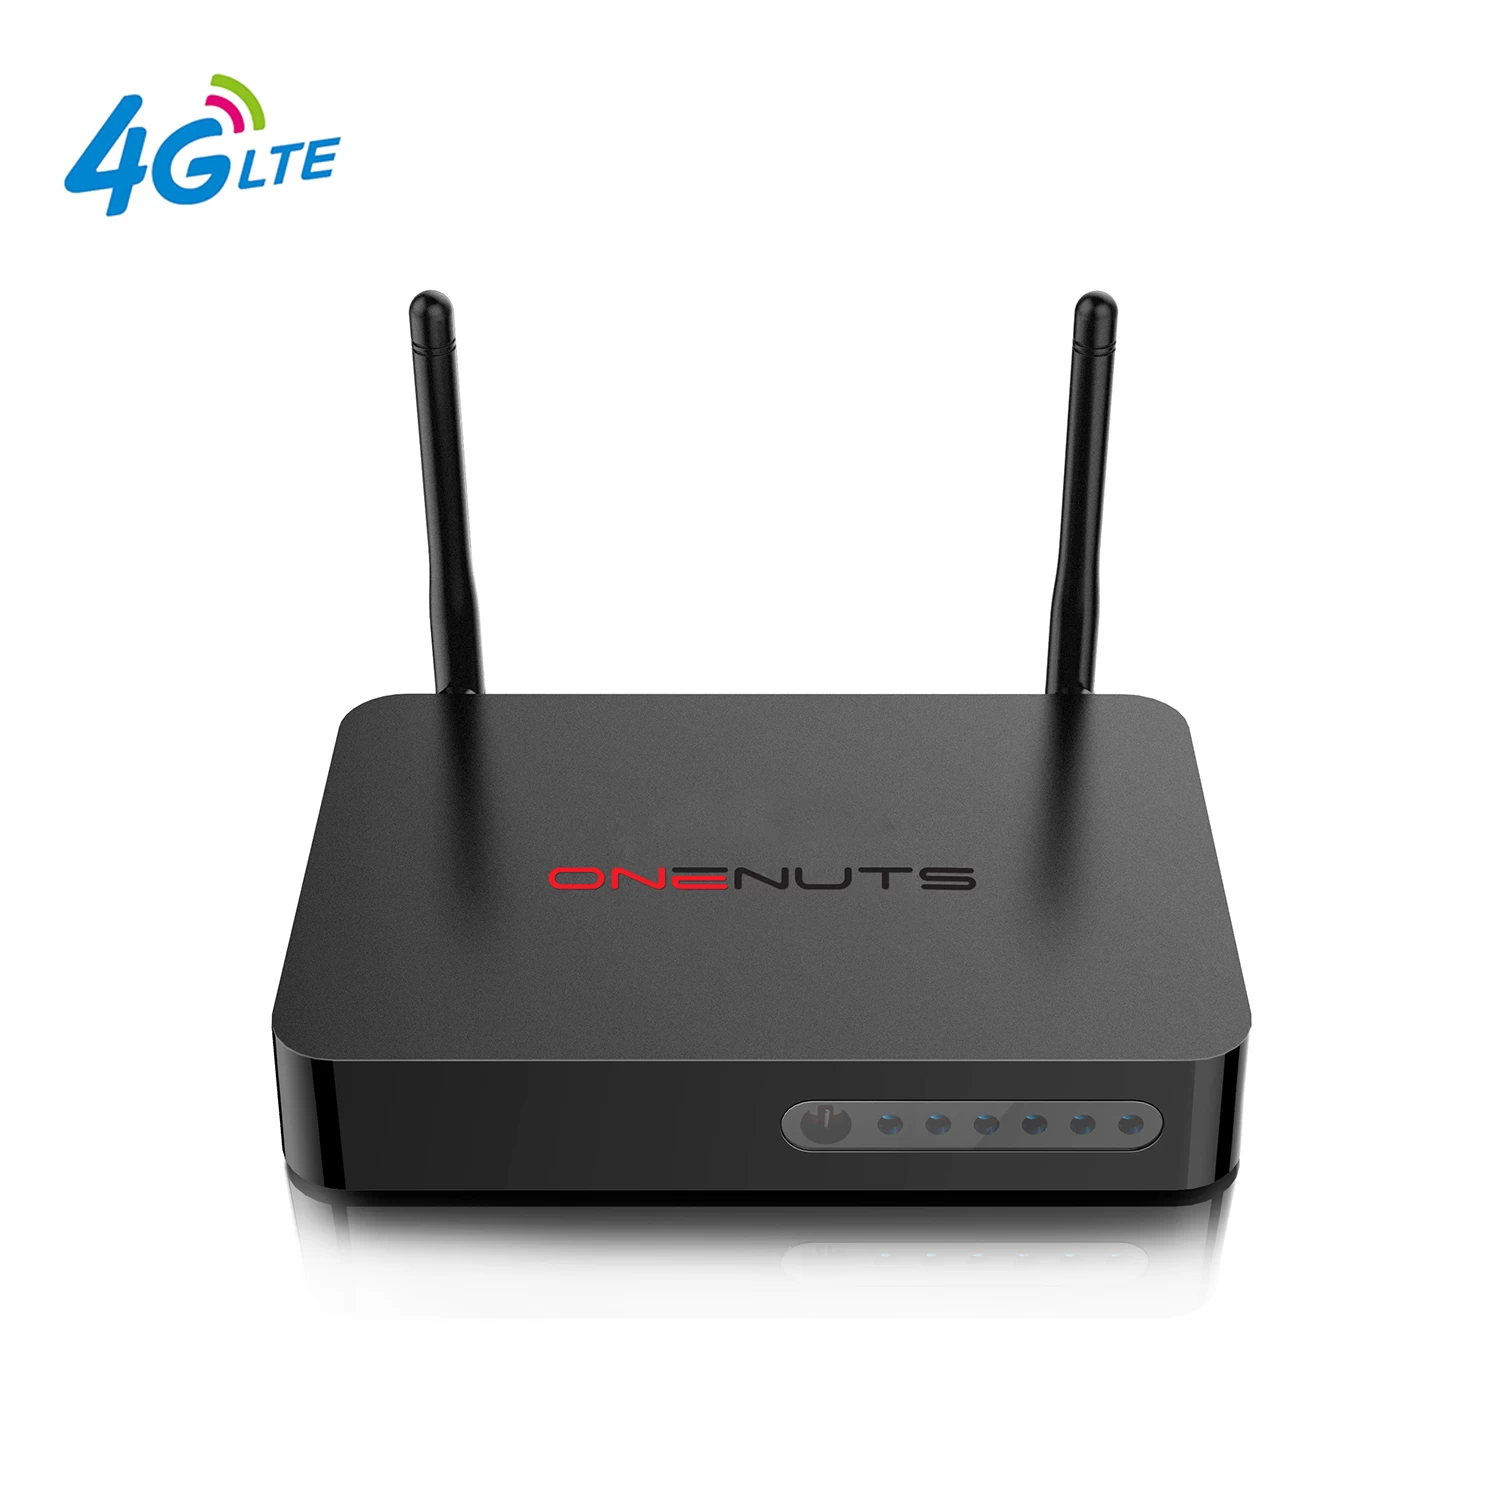 Smart Android TV Box, Android TV Box Huawei WCDMA Modem built in